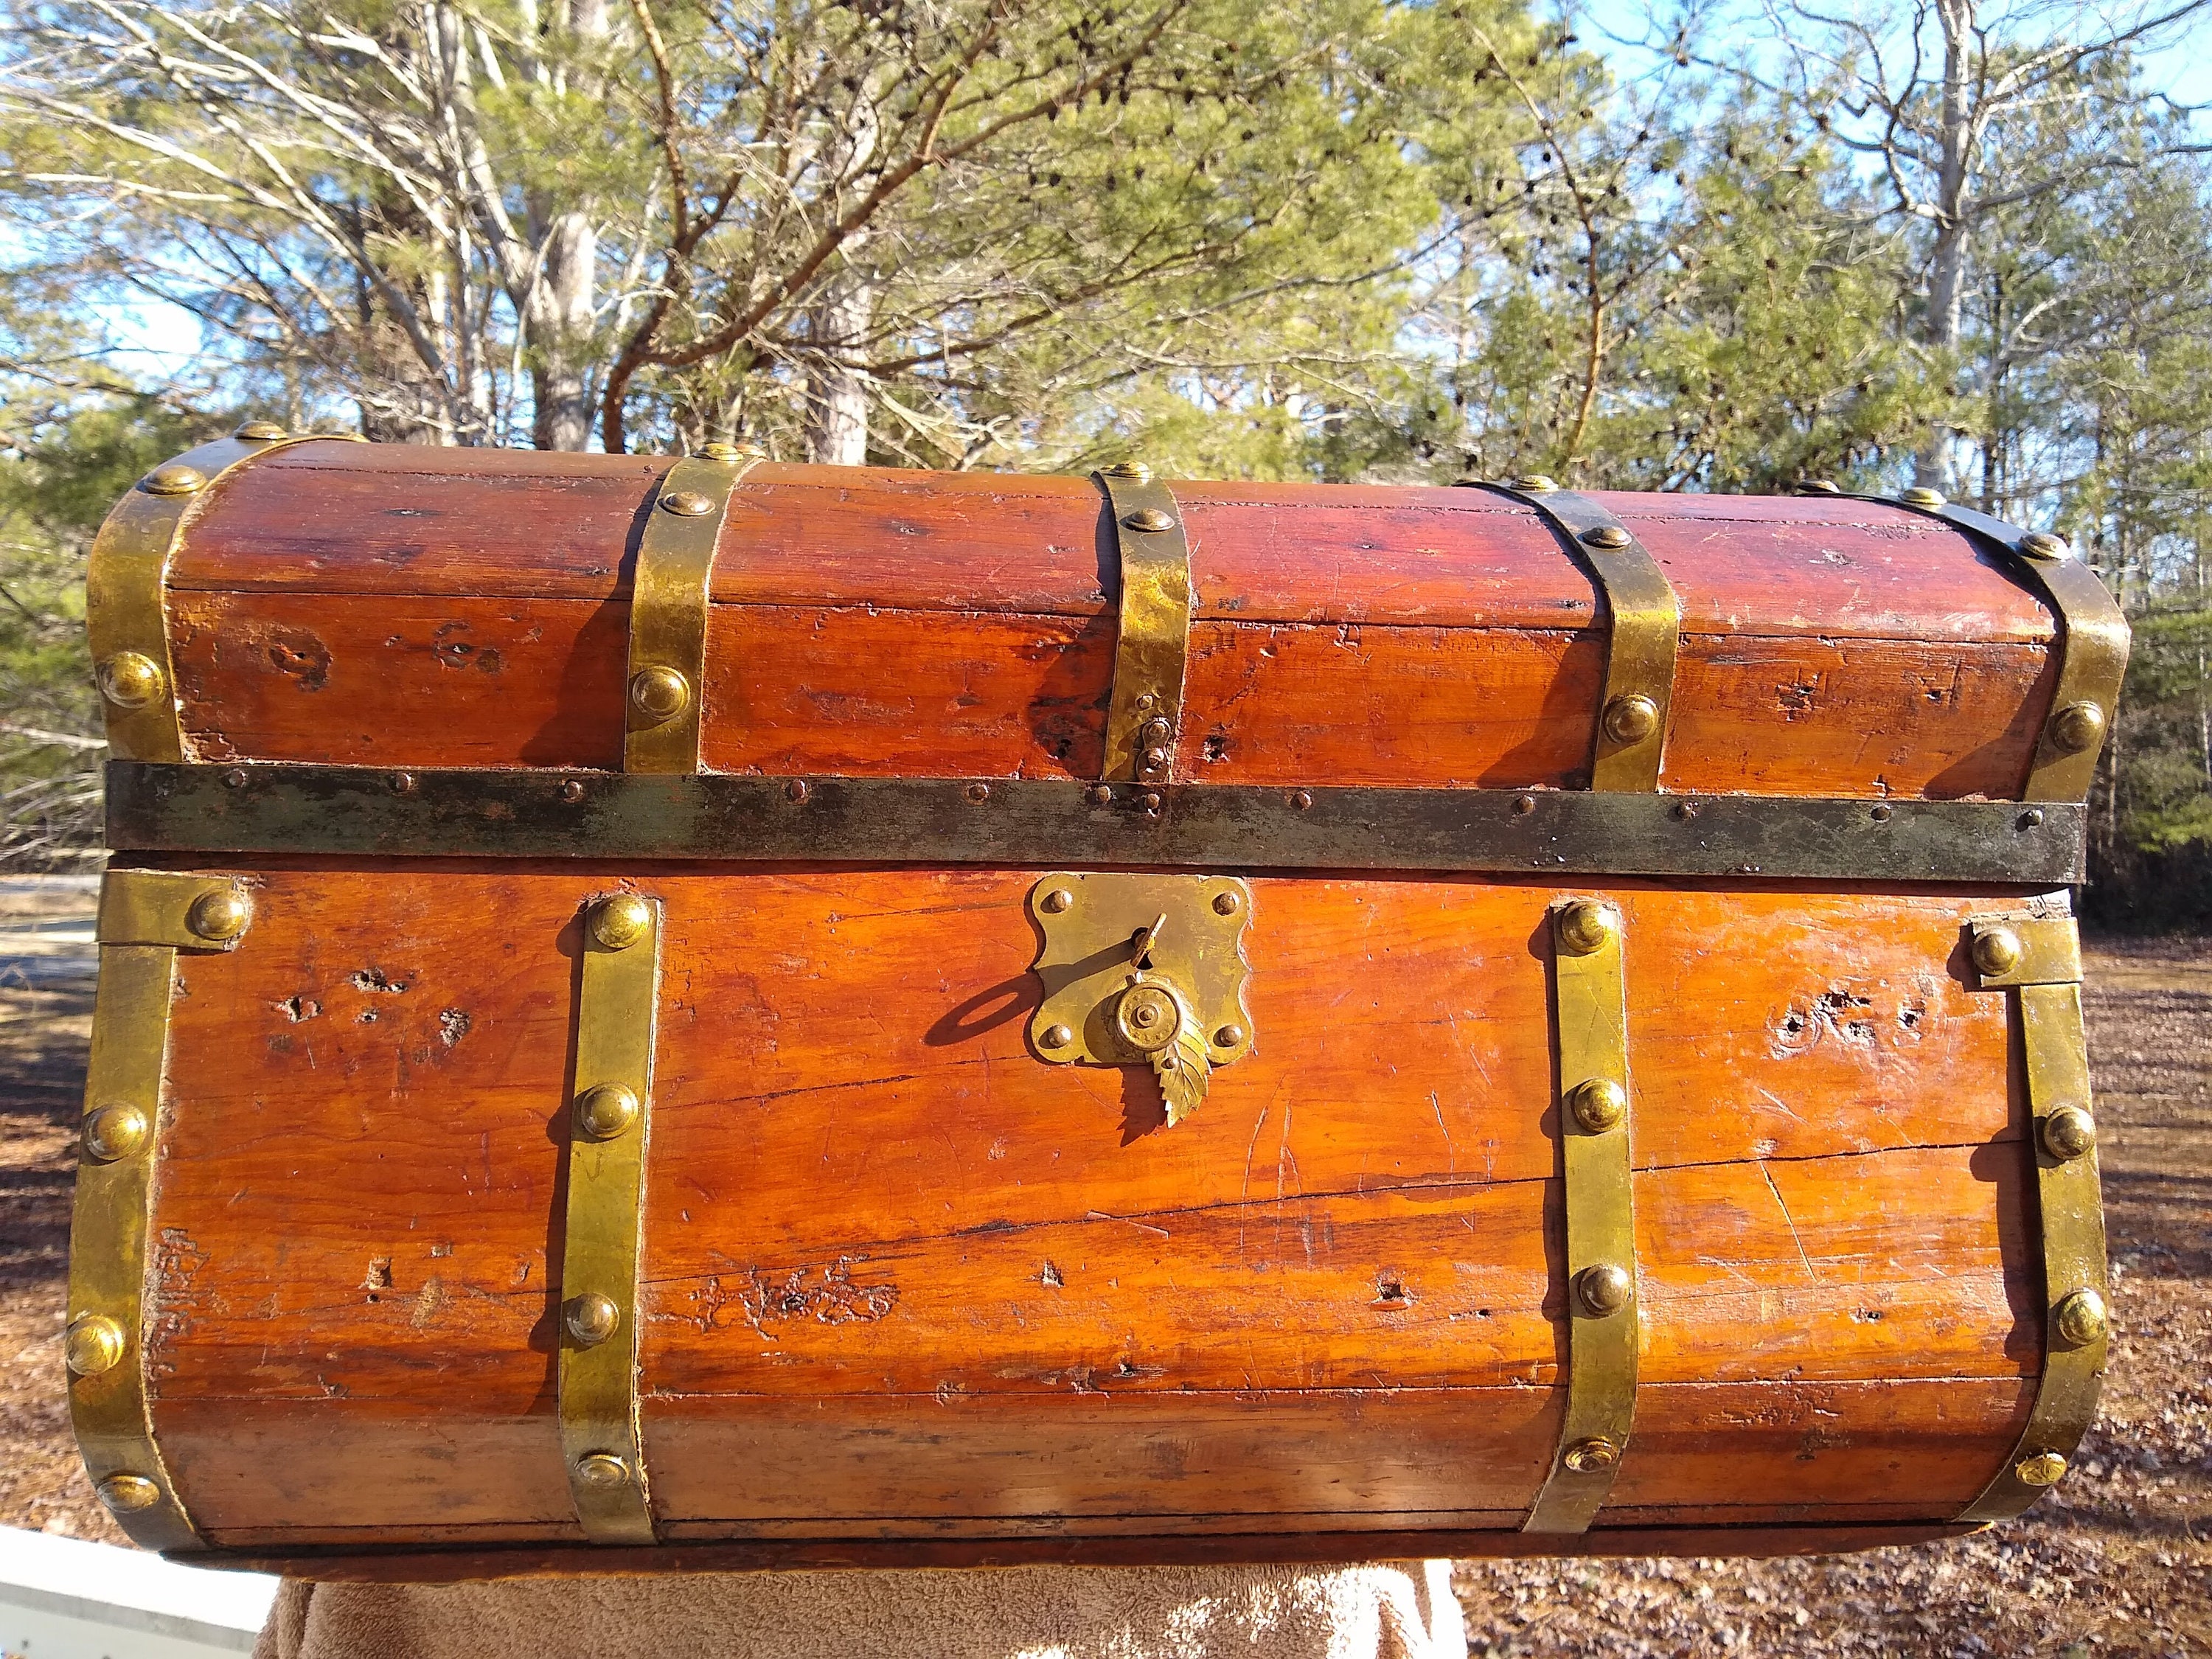 371 Restored Steamer Trunks For Sale - All Wood, Leather and Pressed Tin -  Dome Top, Flat Top, Roll Top